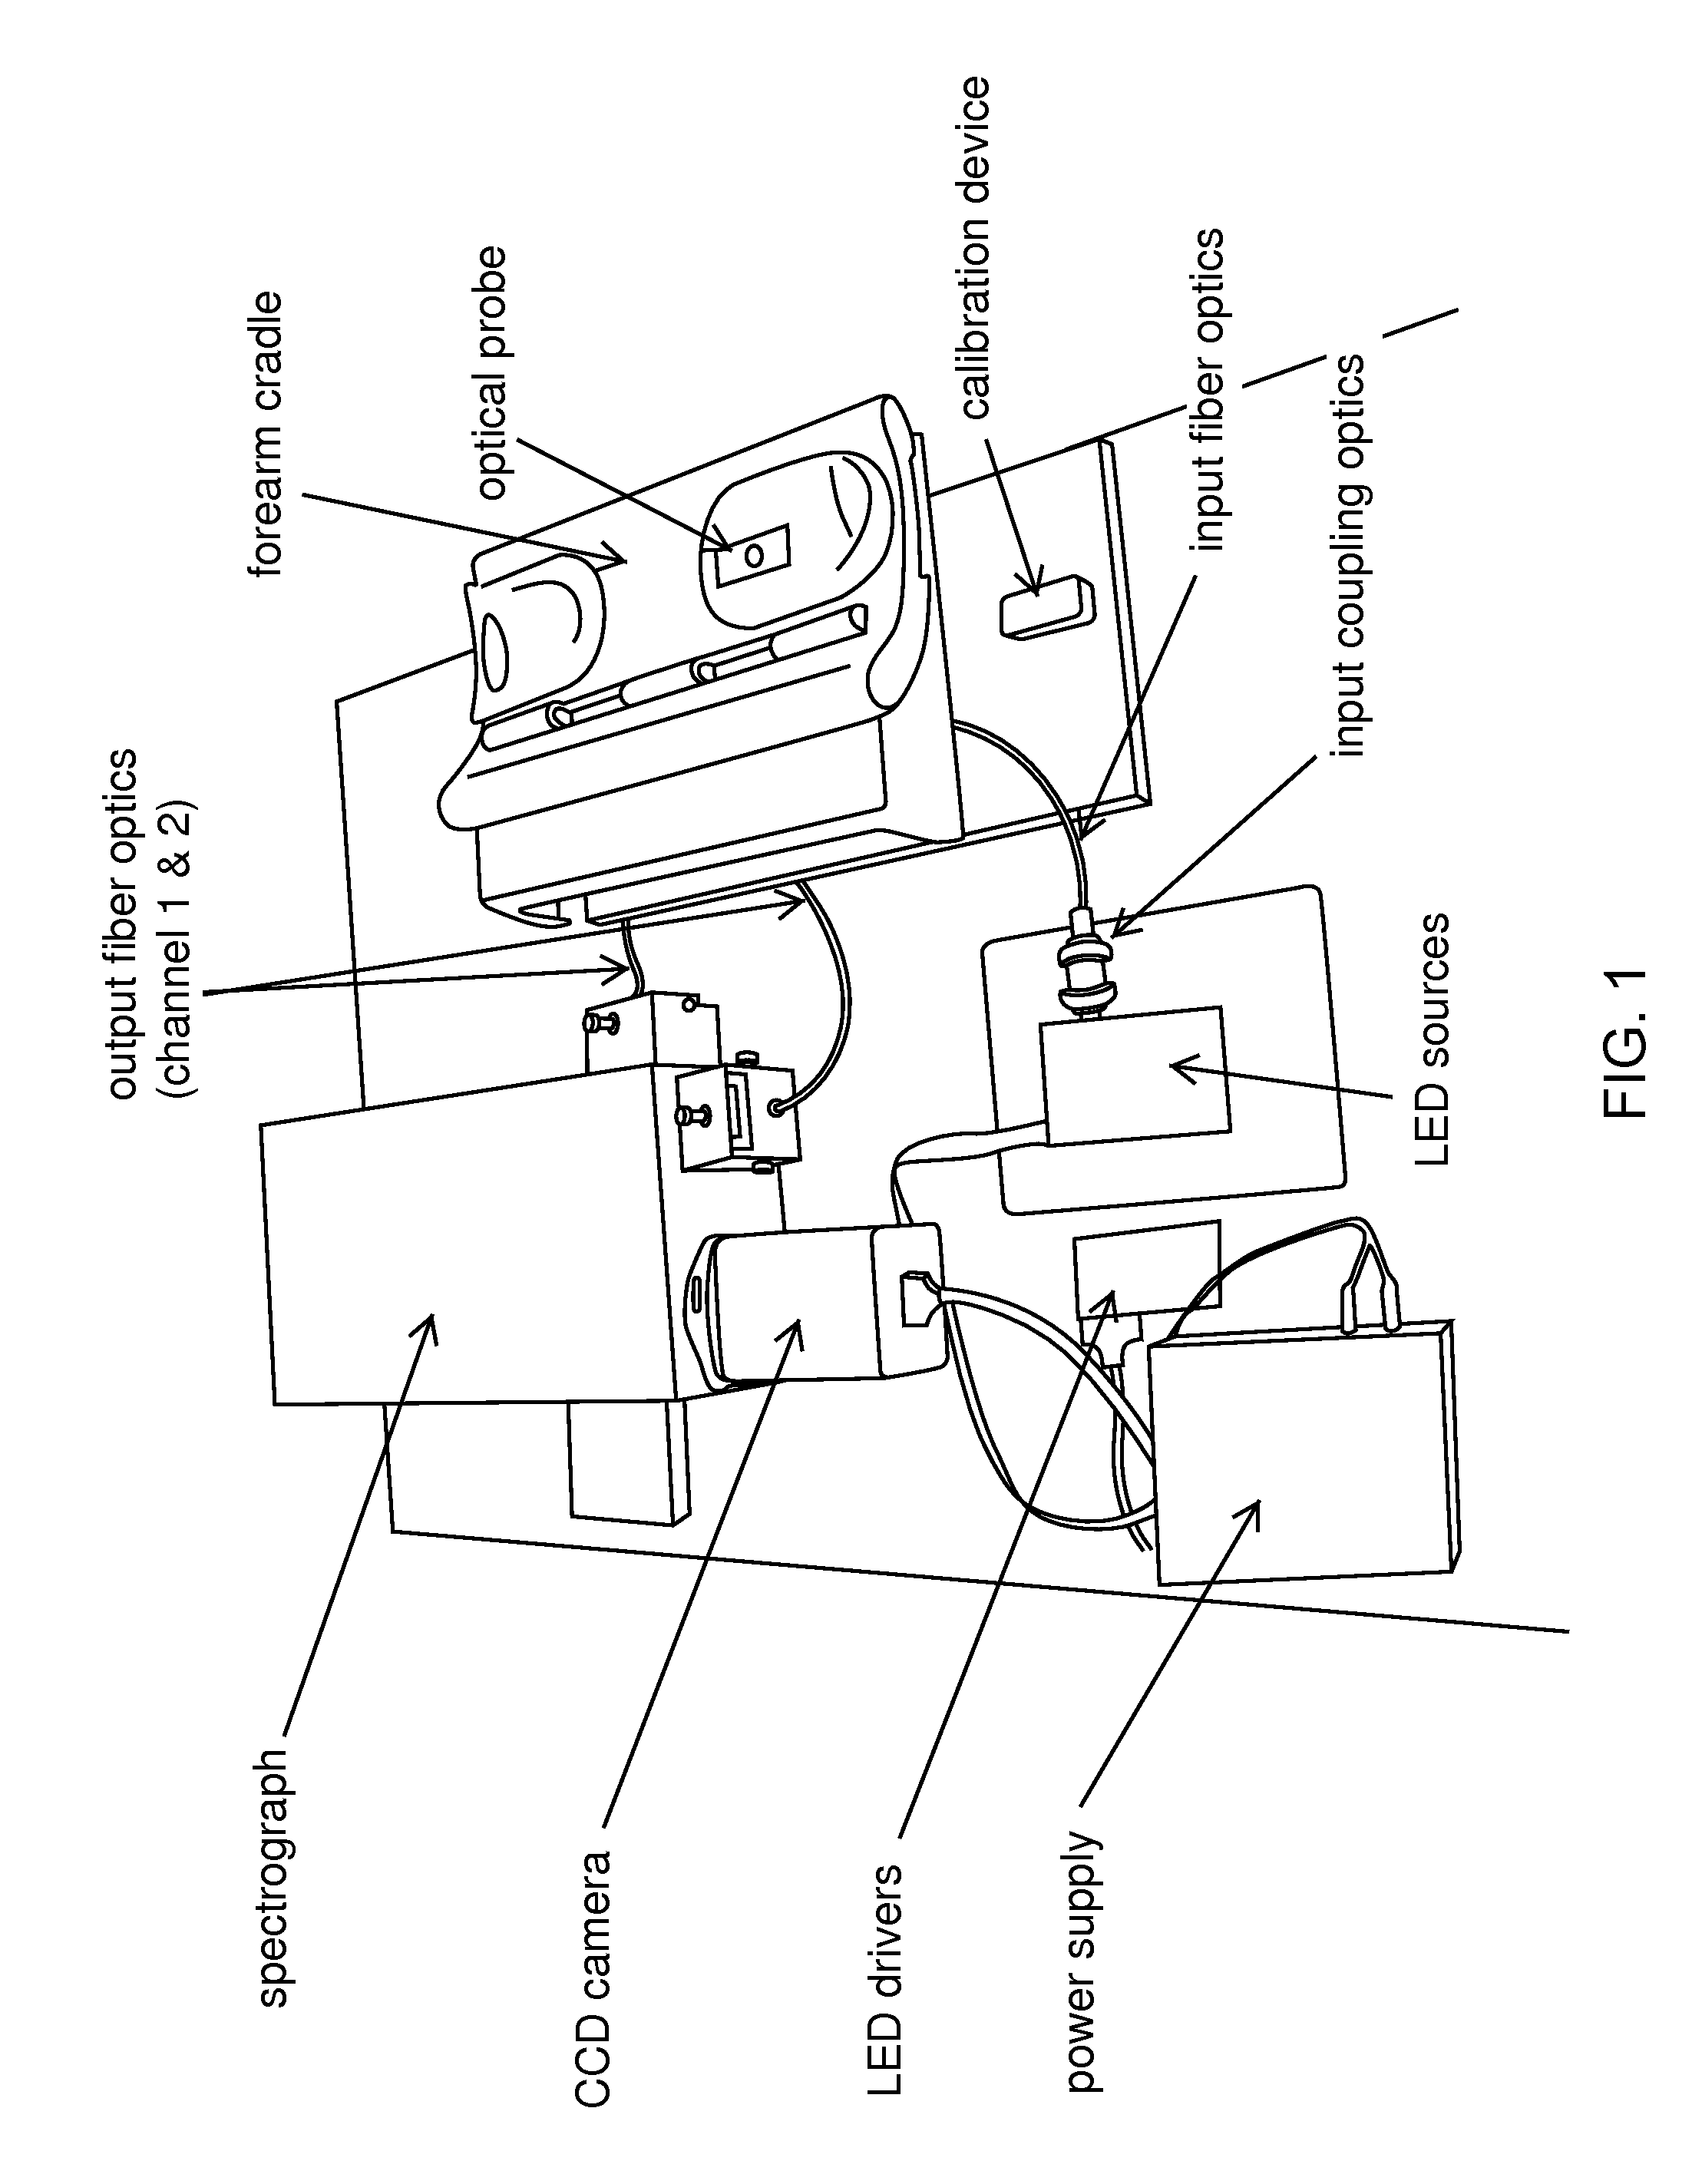 Method and apparatus to compensate for melanin and hemoglobin variation in determination of a measure of a glycation end-product or disease state using tissue fluorescence